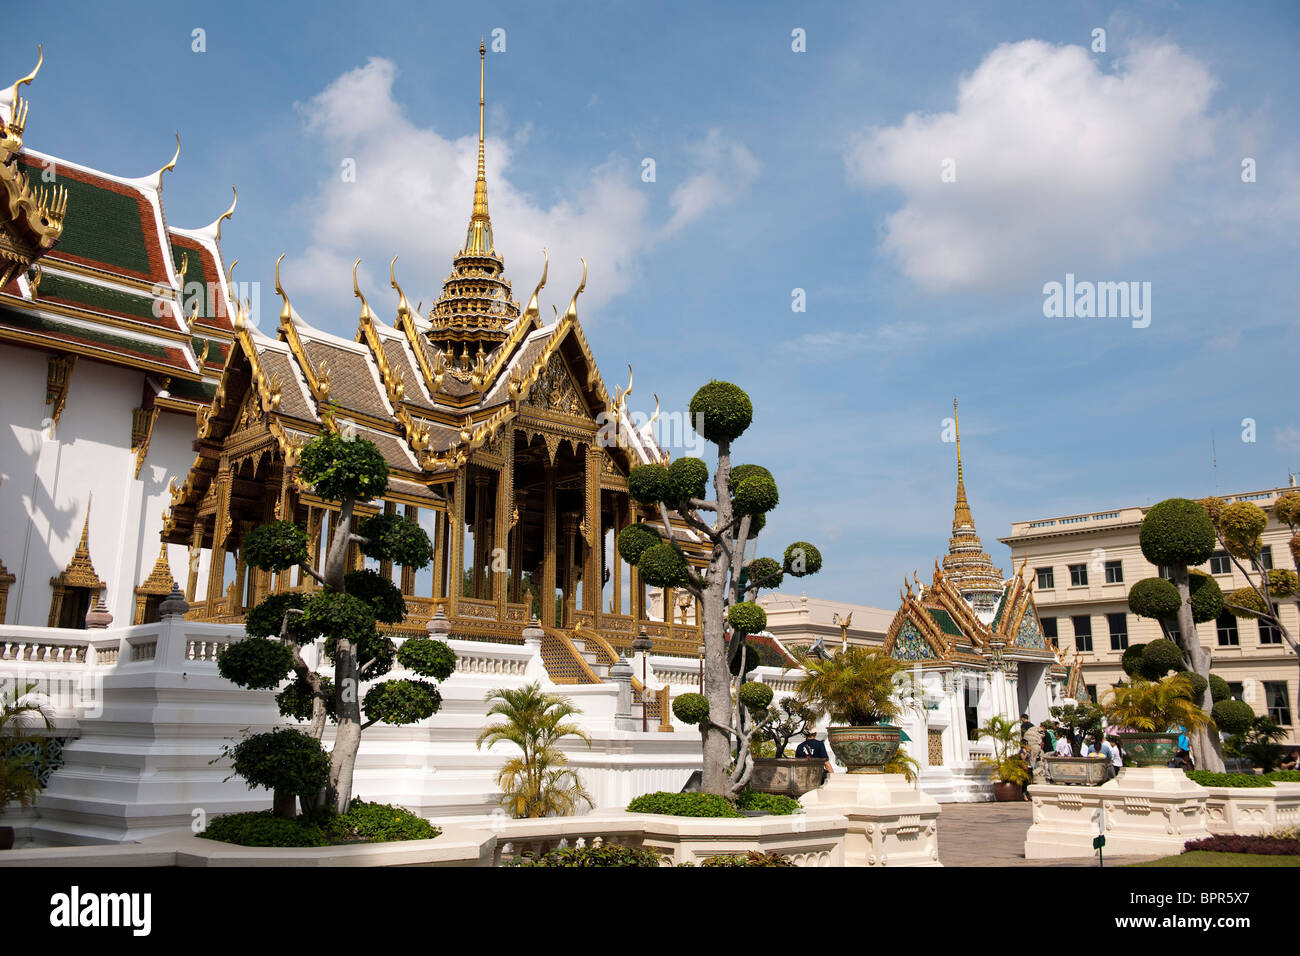 Aphorn Phimok Pavilion in front of Dusit Maha Prasat throne hall, Governement building, Grand Palace, Bangkok, Thailand Stock Photo